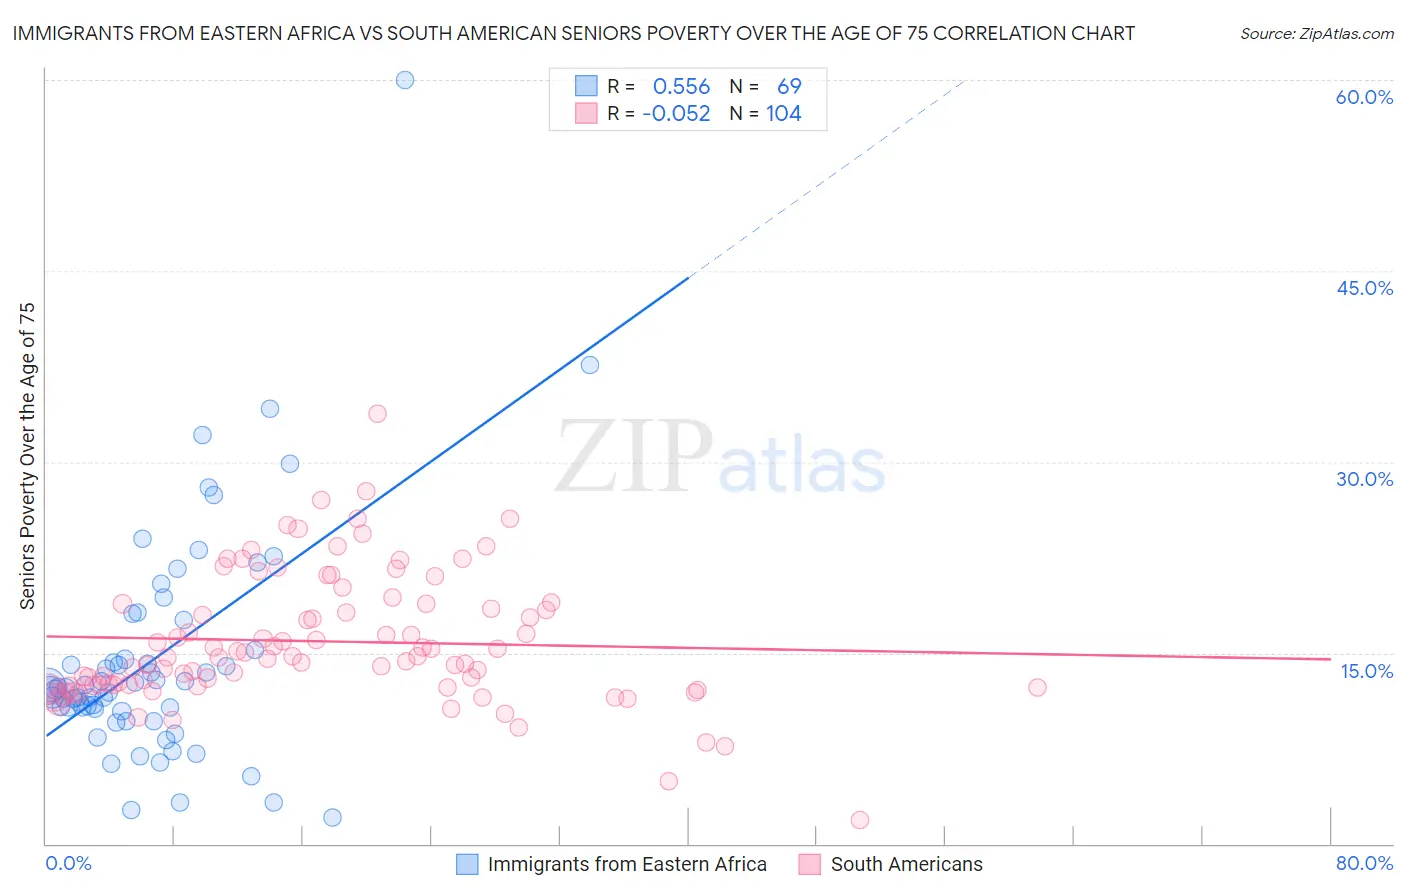 Immigrants from Eastern Africa vs South American Seniors Poverty Over the Age of 75